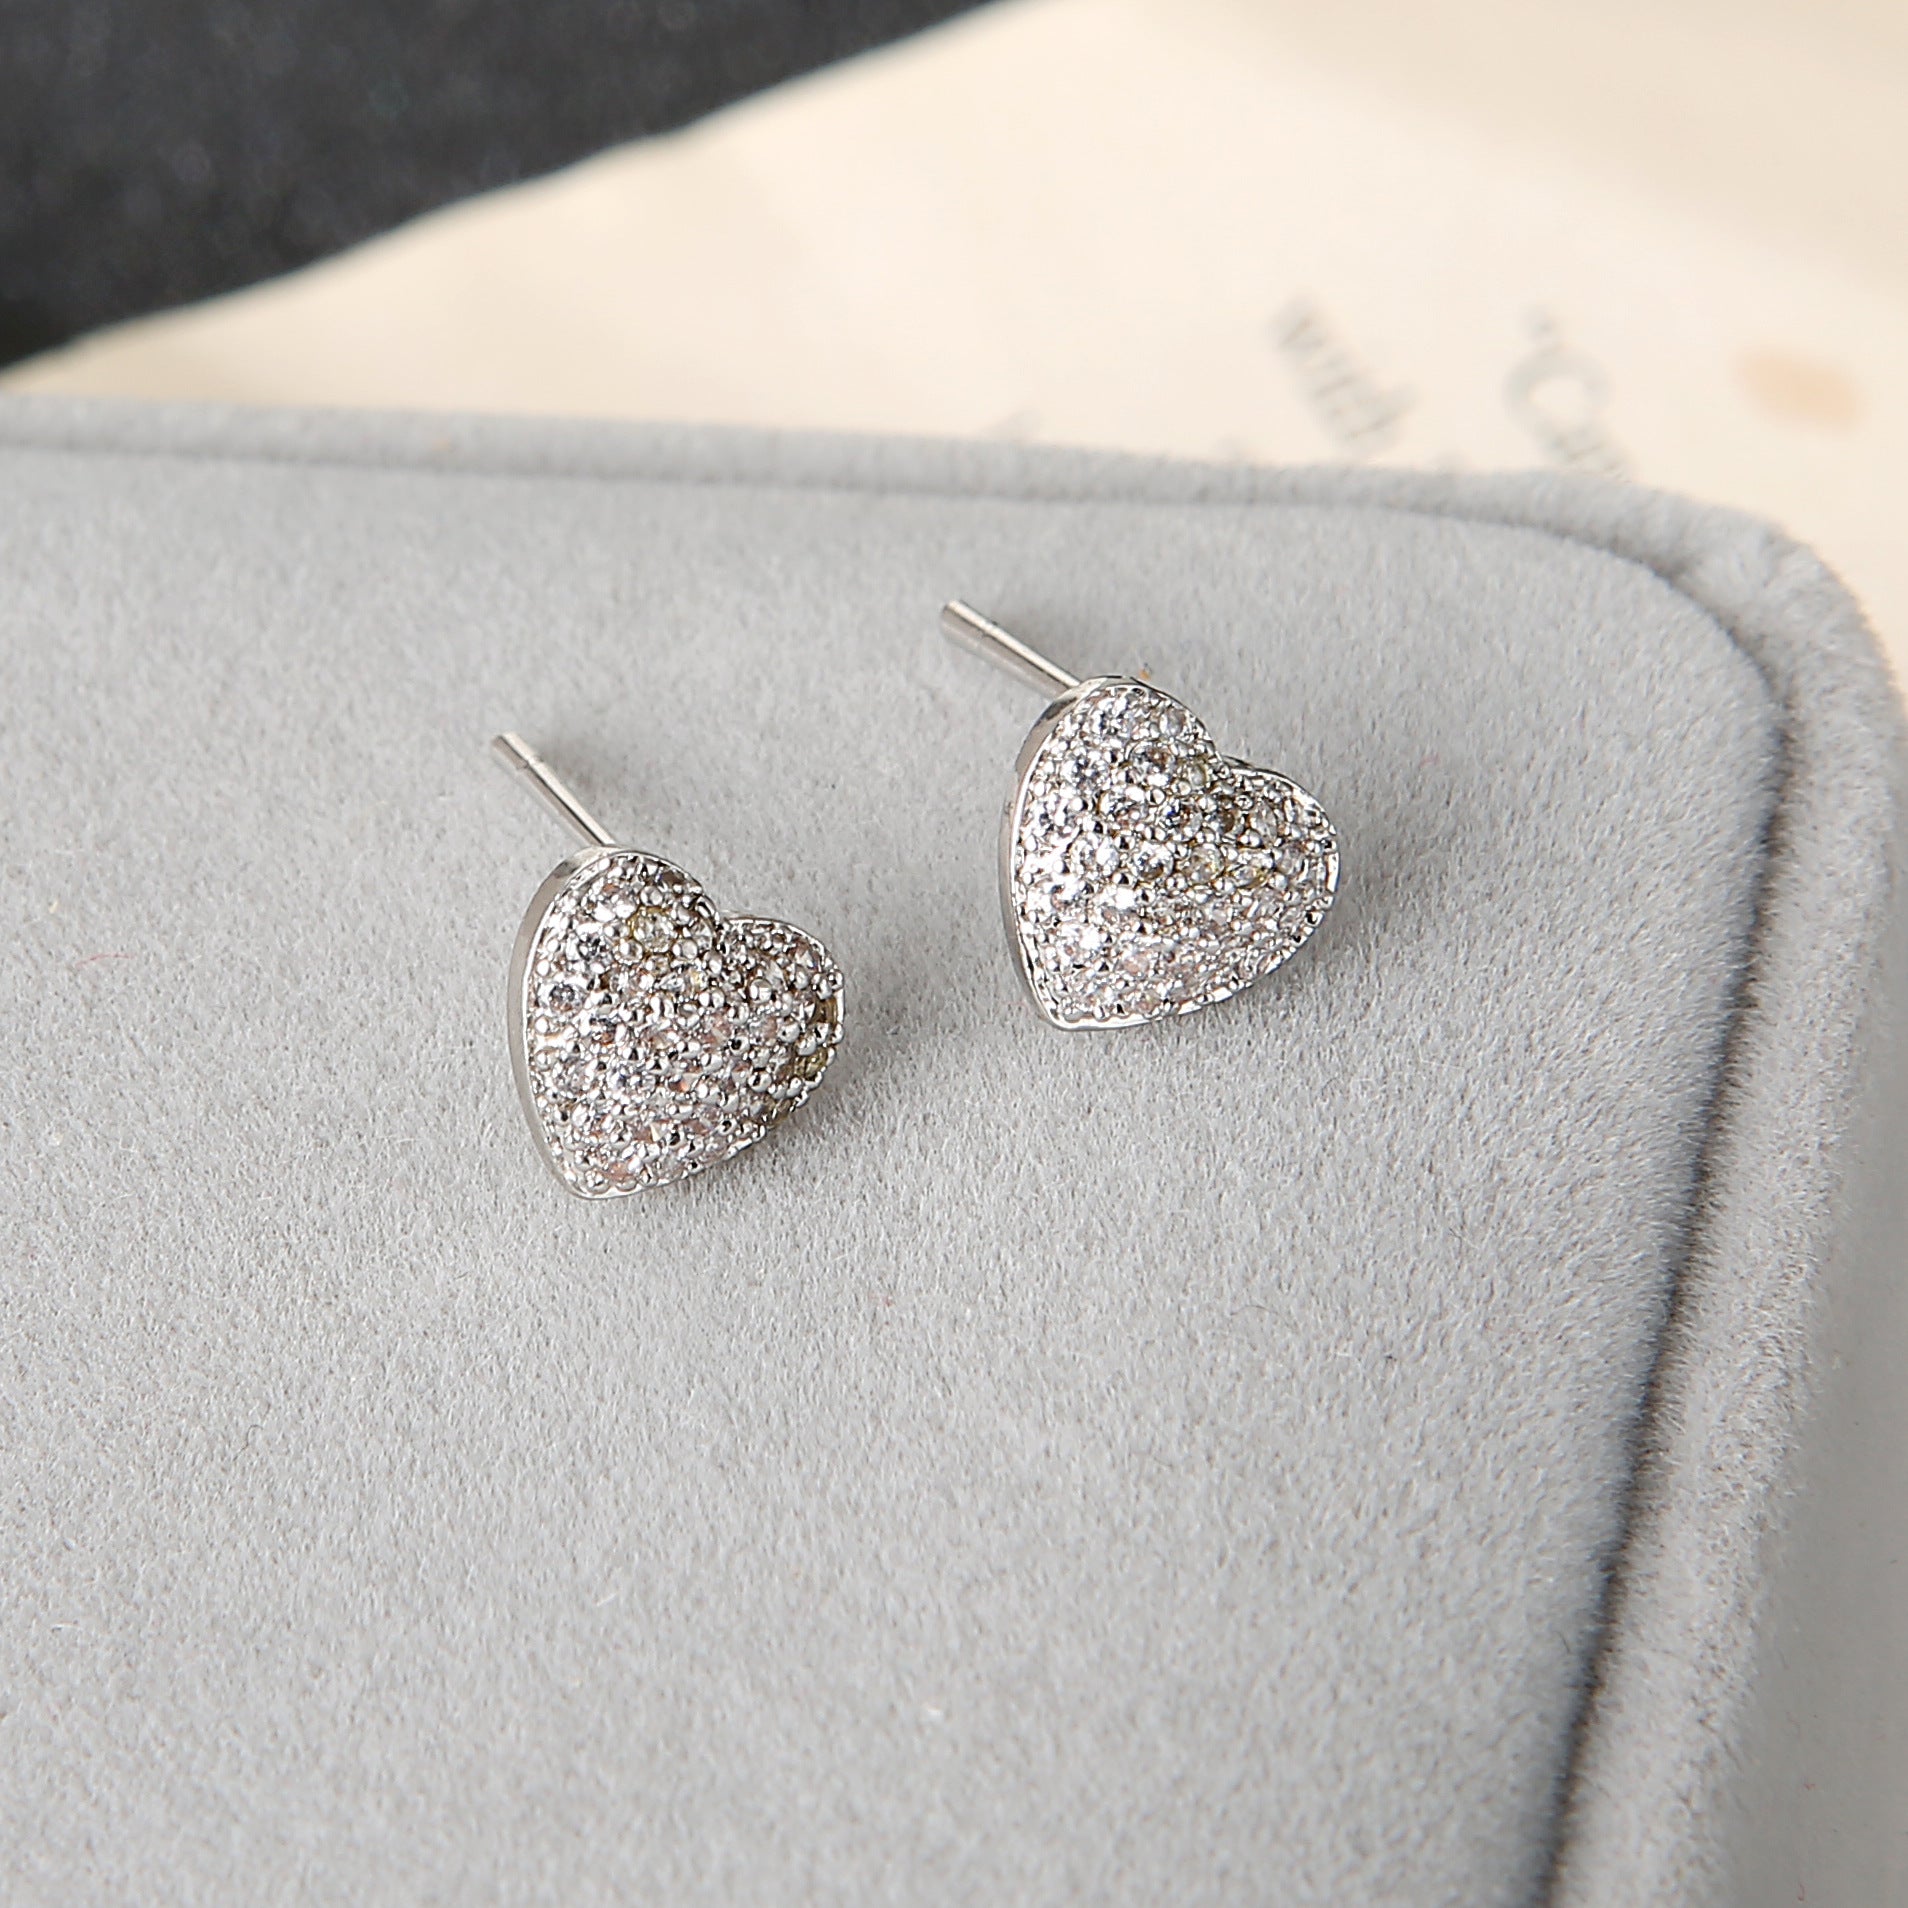 A pair of Maramalive™ Love Stud Earrings on a white background.